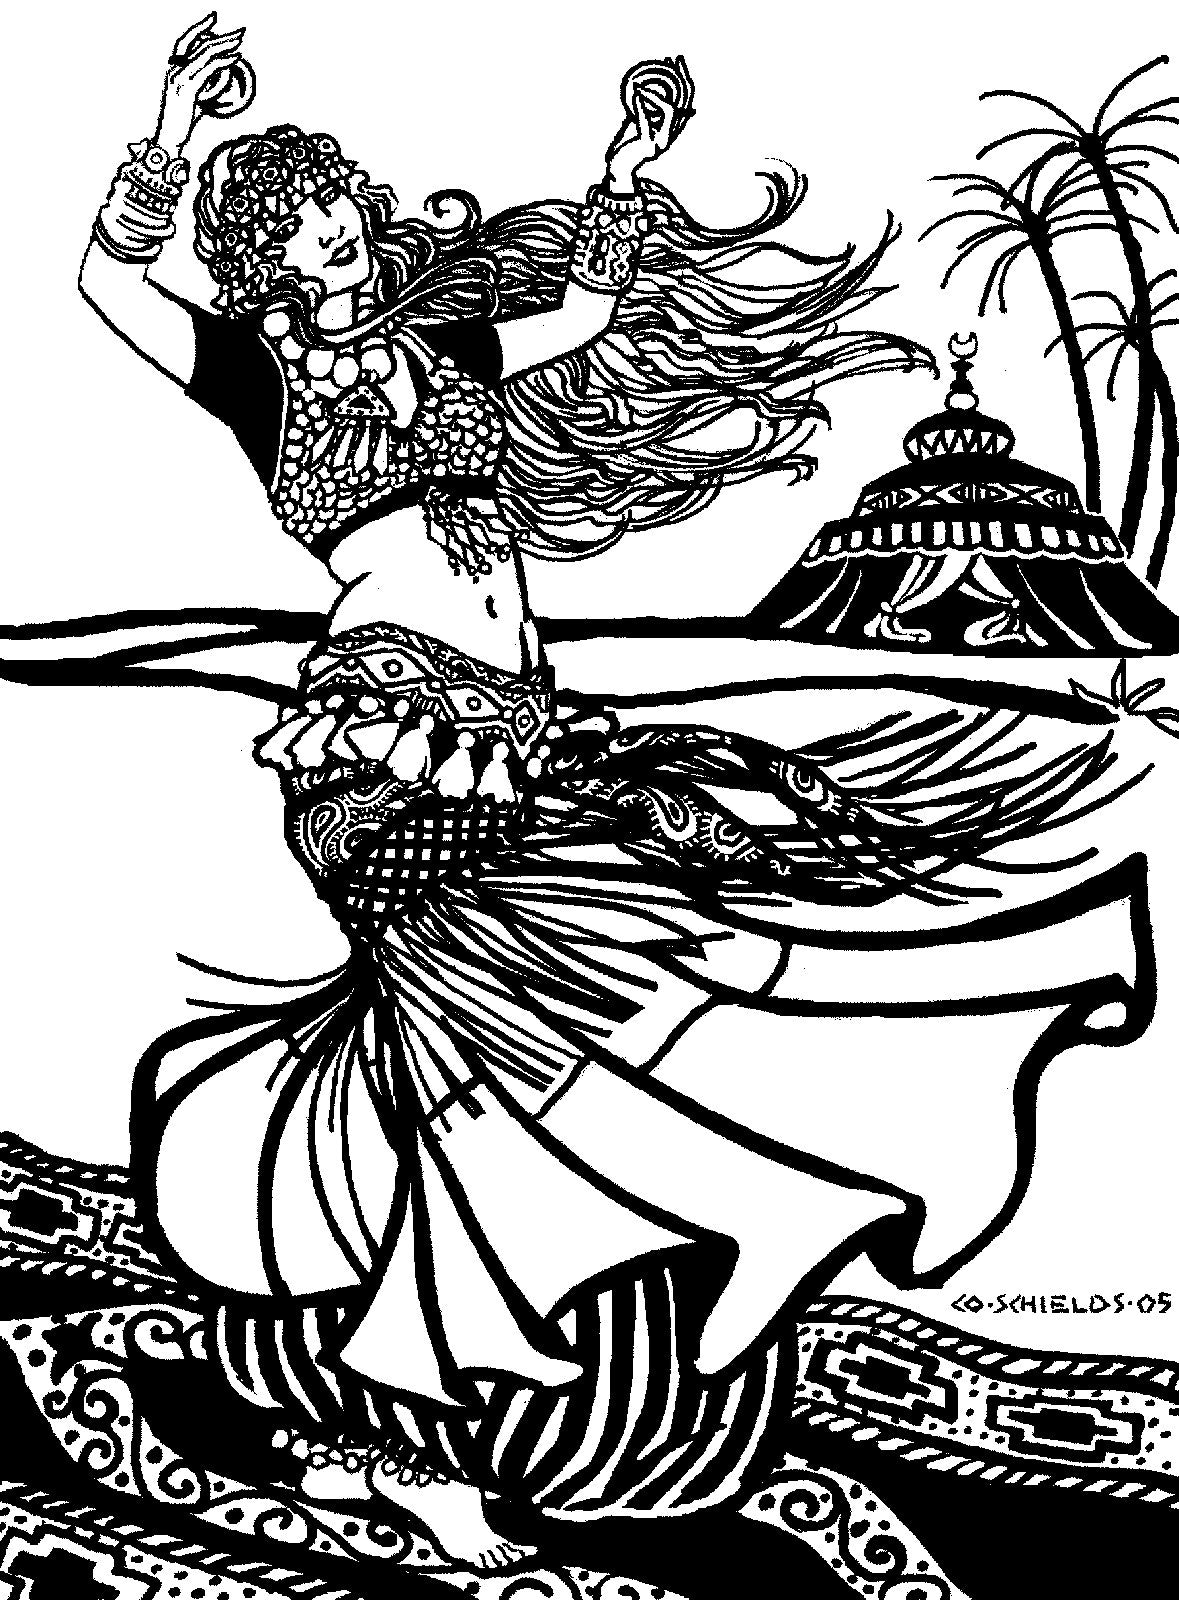 Black and white pen and ink drawing by artist Gretchen Schields.  Woman dancing in tribal style bellydance ensemble .  Woman holds cymbals in her hands and is standing on an ornate rug. 